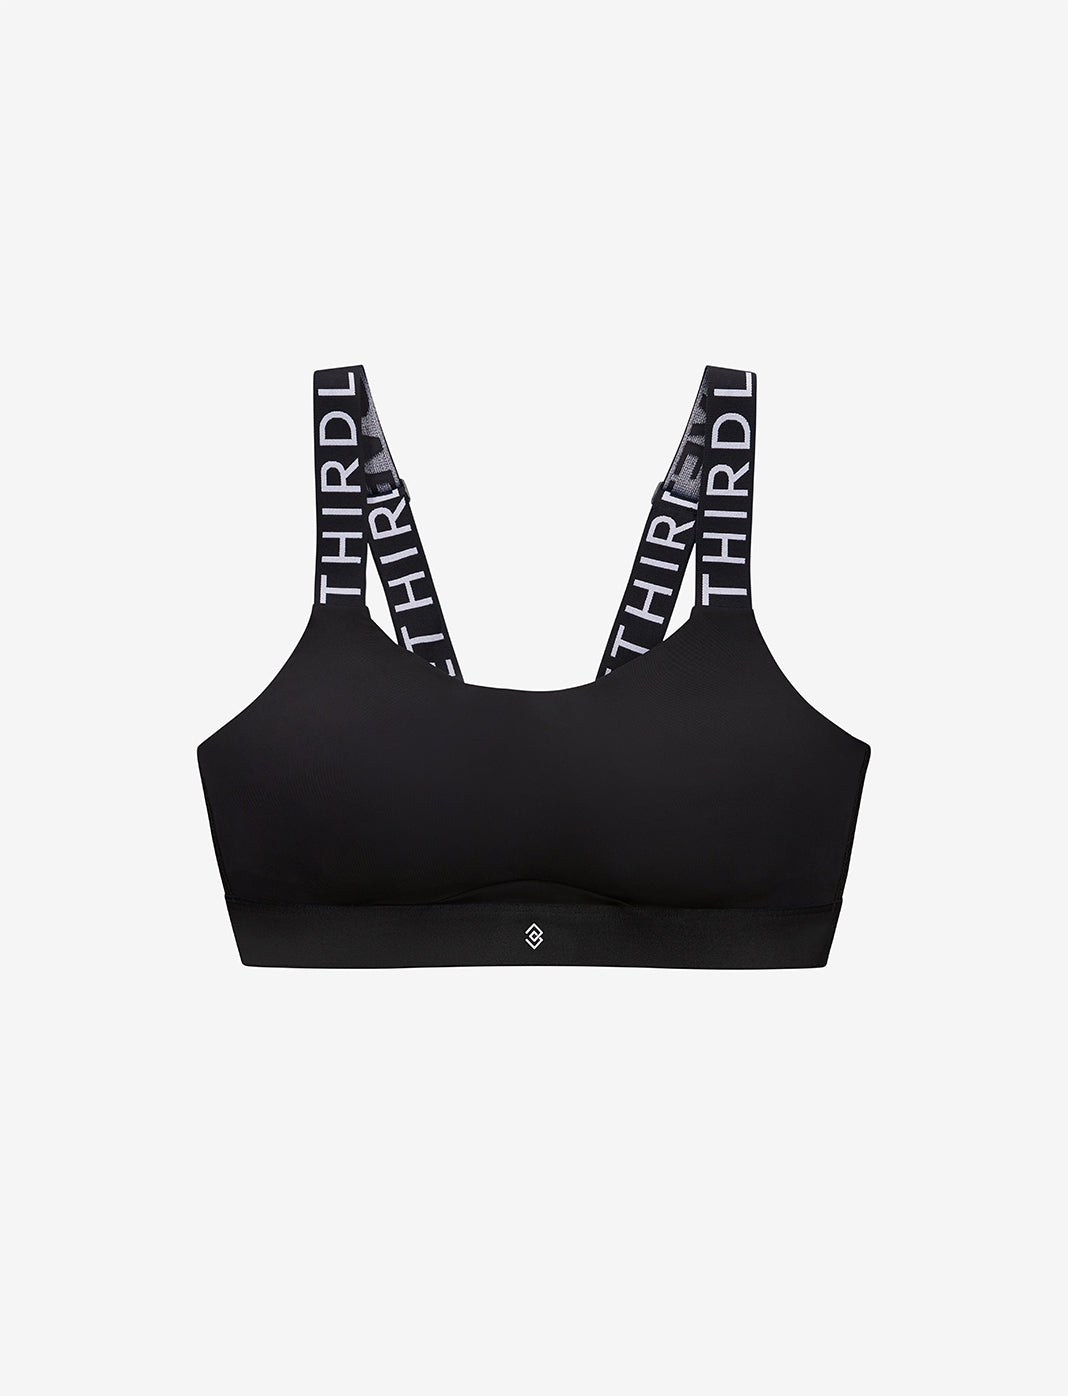 An Essential Sports Bra: ThirdLove Flex Seamless Racerback Sports Bra, ThirdLove, Your Favourite Bra Brand, Just Launched Size-Inclusive,  Performance Activewear